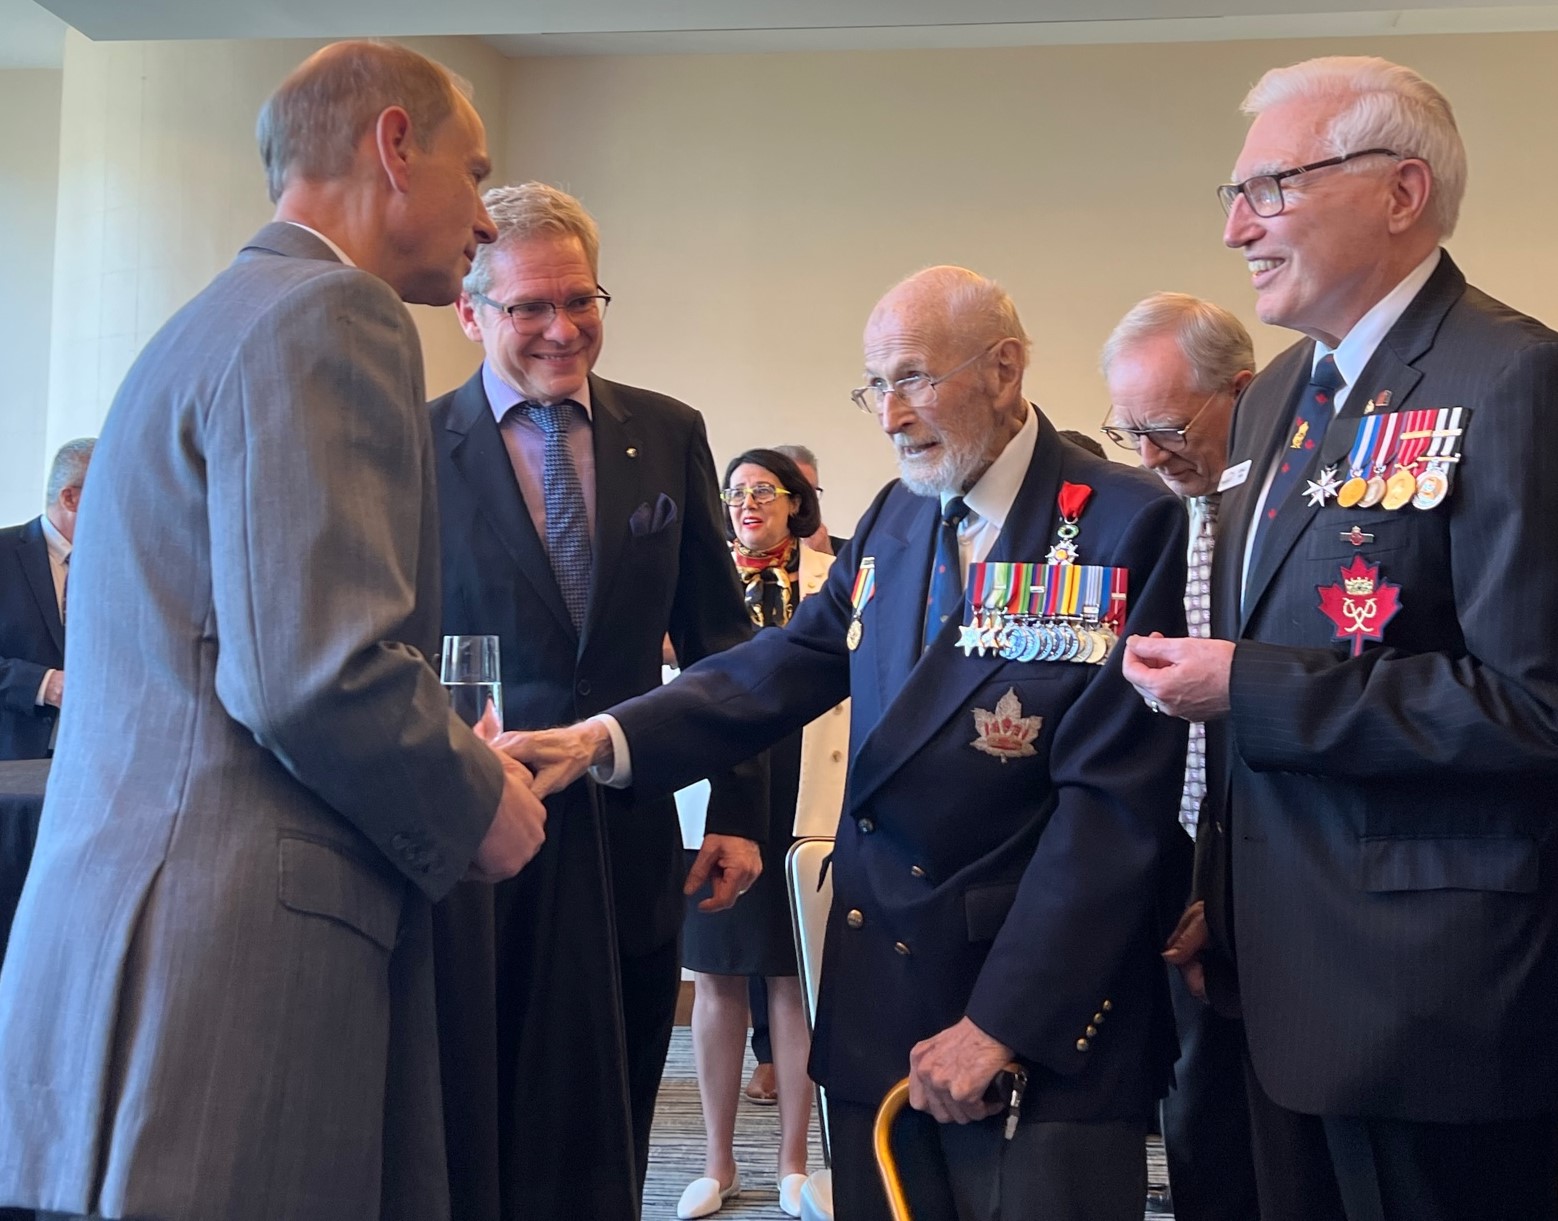 Peter Chance shakes hands with Prince Edward and meets with Randall Mang, Chair of the B.C. Council for The Duke of Edinburgh’s Award and Lieutenant-Commander (ret’d) Gerald Pash, a long-time member of the B.C. Council.  Photo provided